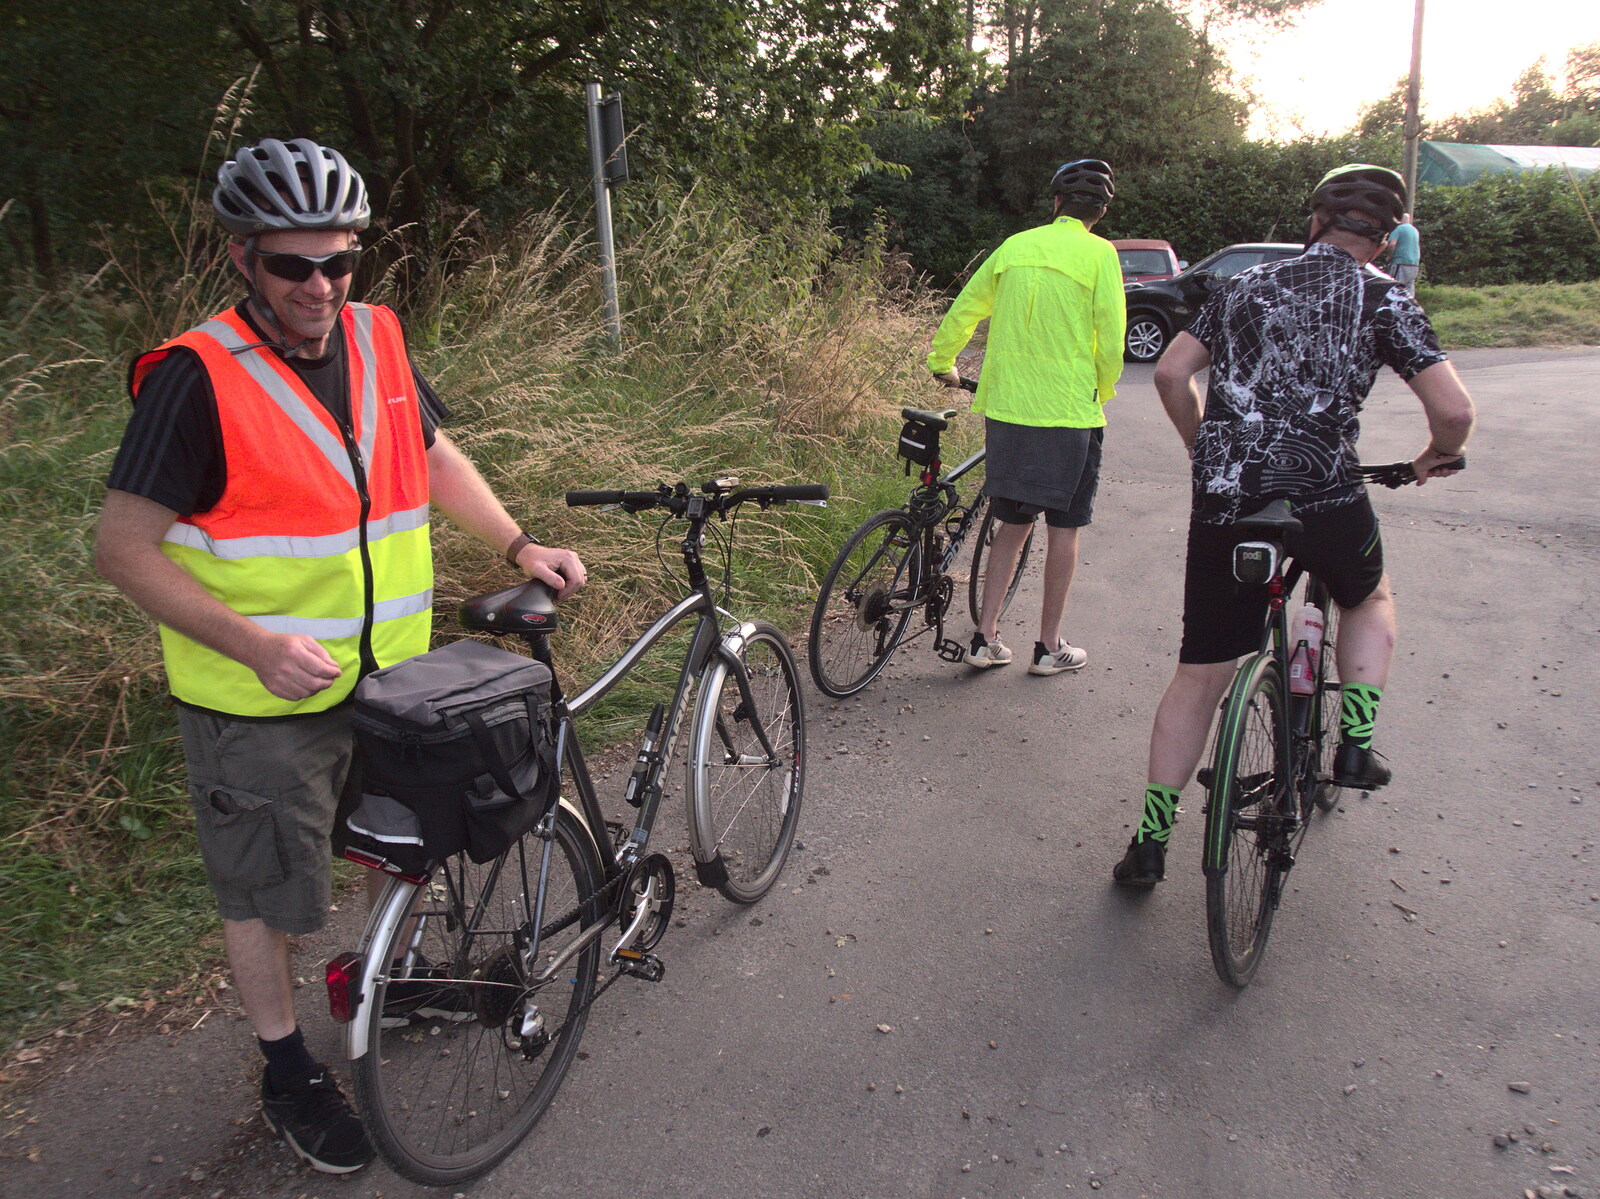 We head off back from Gissing from The BSCC at The Crown, Gissing, Norfolk - 22nd July 2021